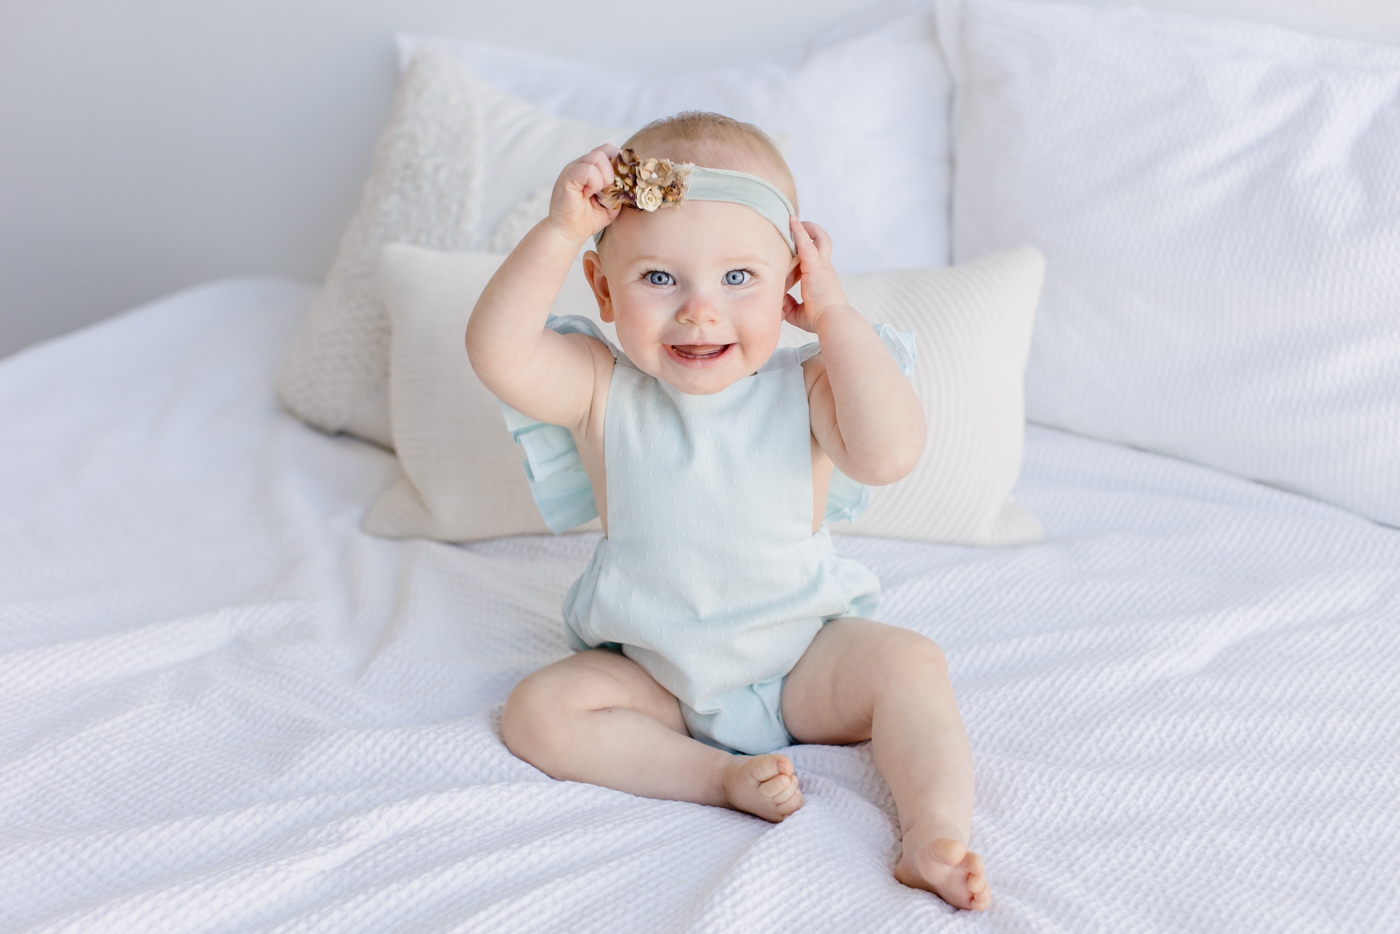 Smiling toddler with floral headband and romper from Client Wardrobe. Photo by Sana Ahmed Photography.